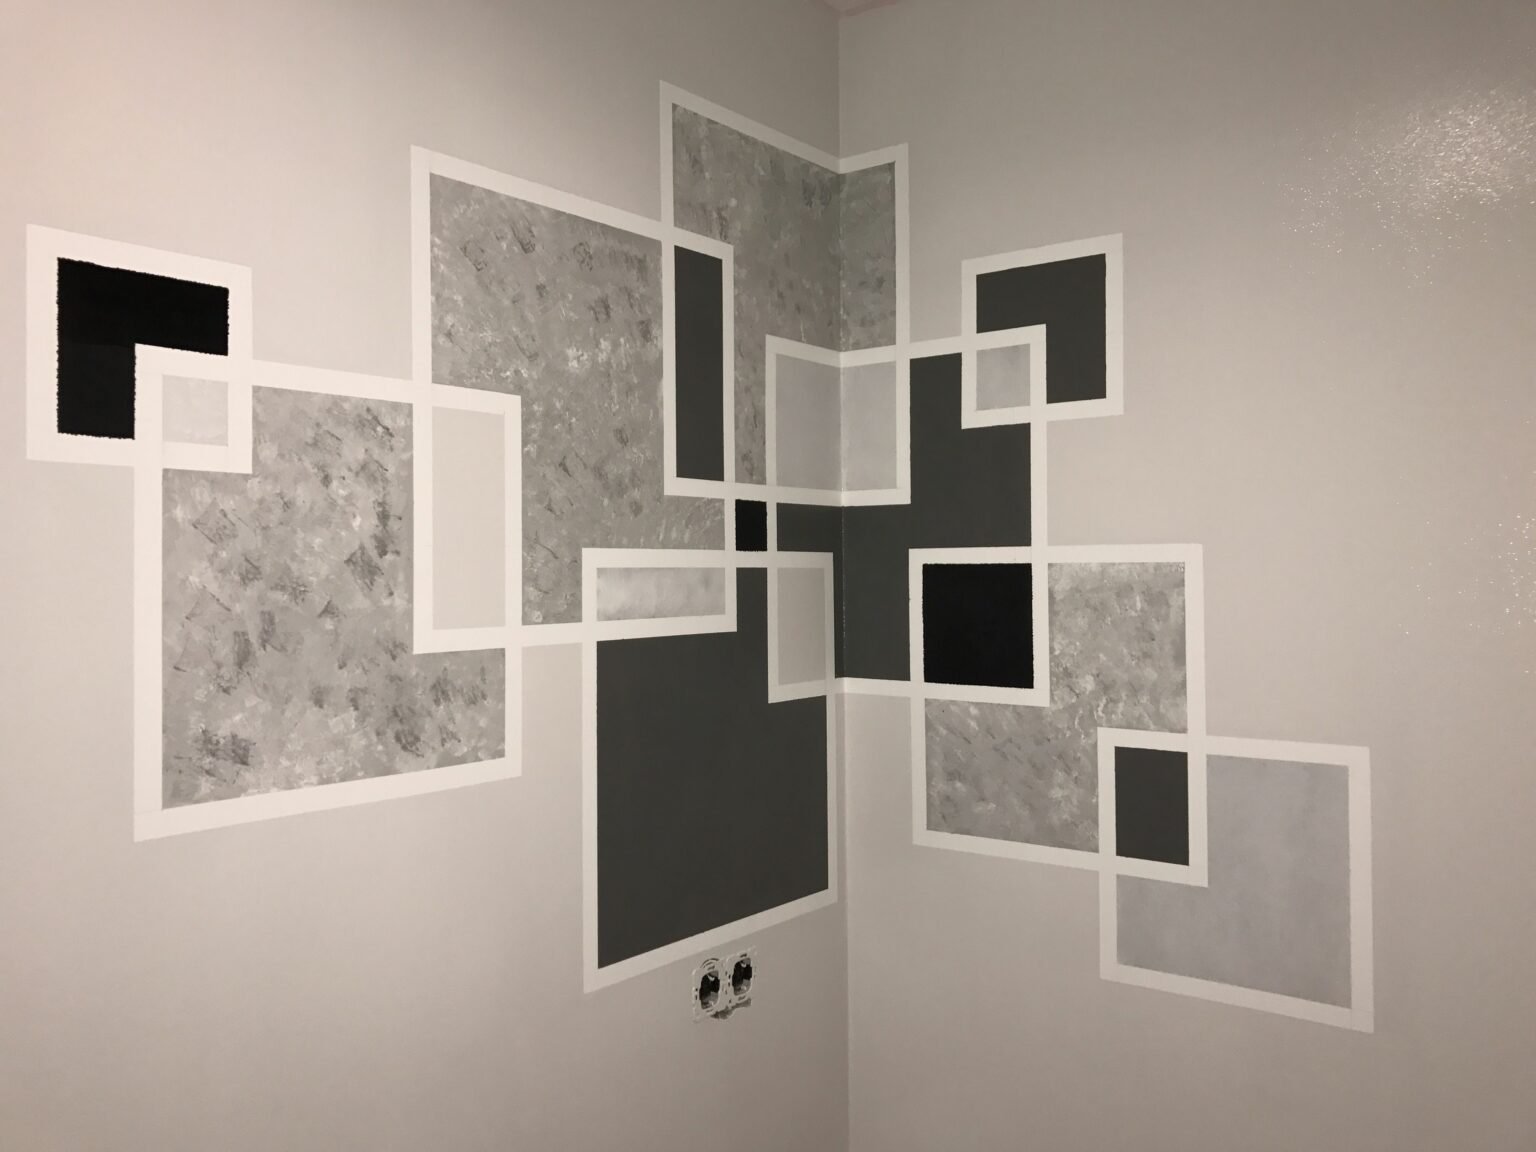 Gray Squares Composition Wall Painting Done By Disain Viimistlus  Laura 1536x1152 